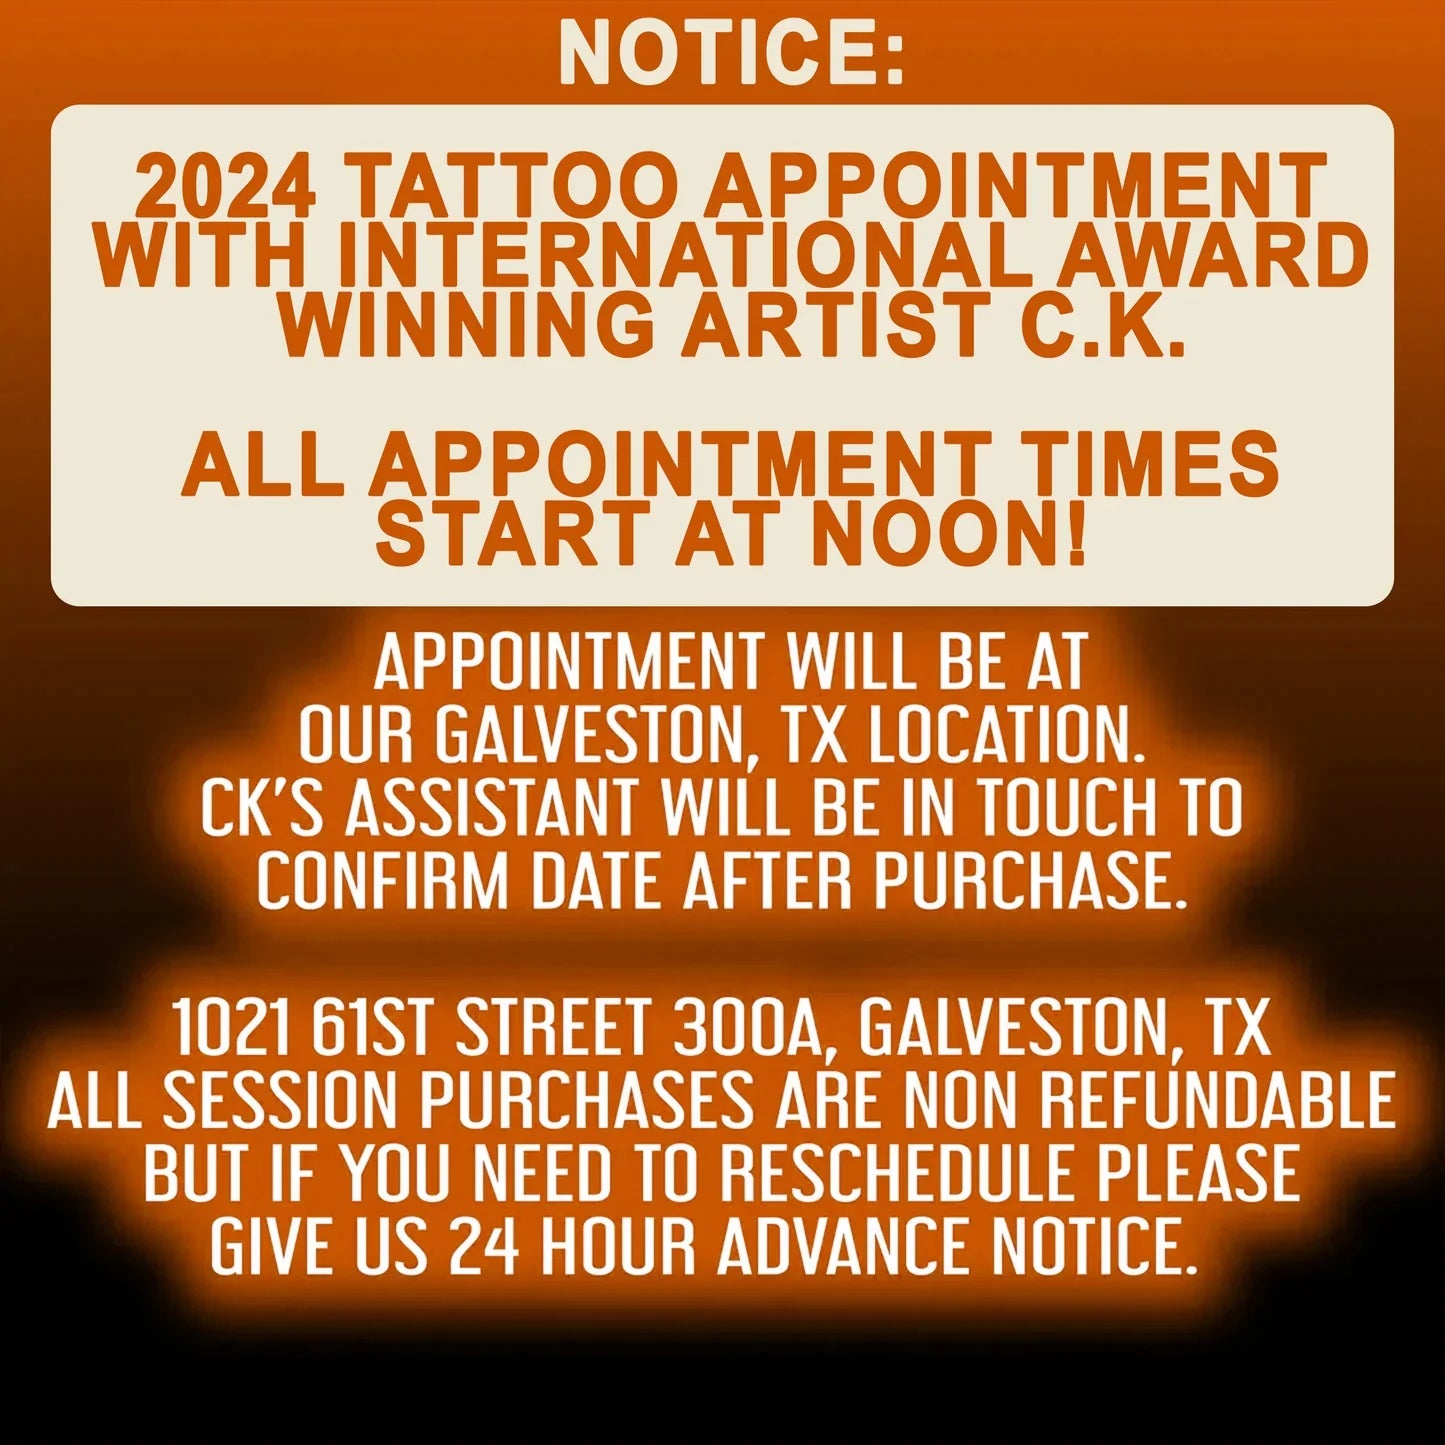 6 hour Tattoo Session with CK June 15th, 2024